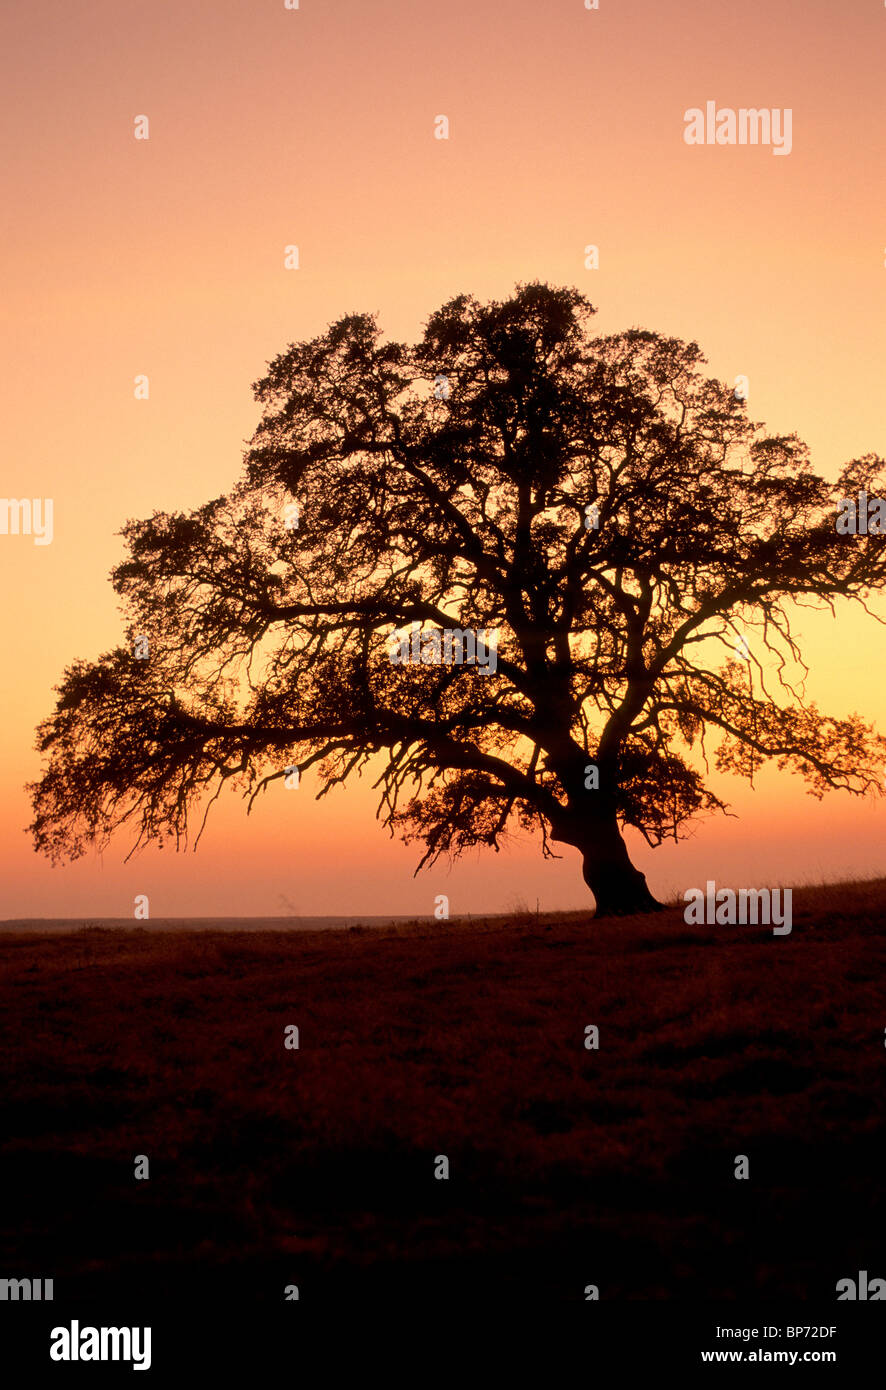 Lone Oak tree silhouetted against sunset sky, Banque D'Images